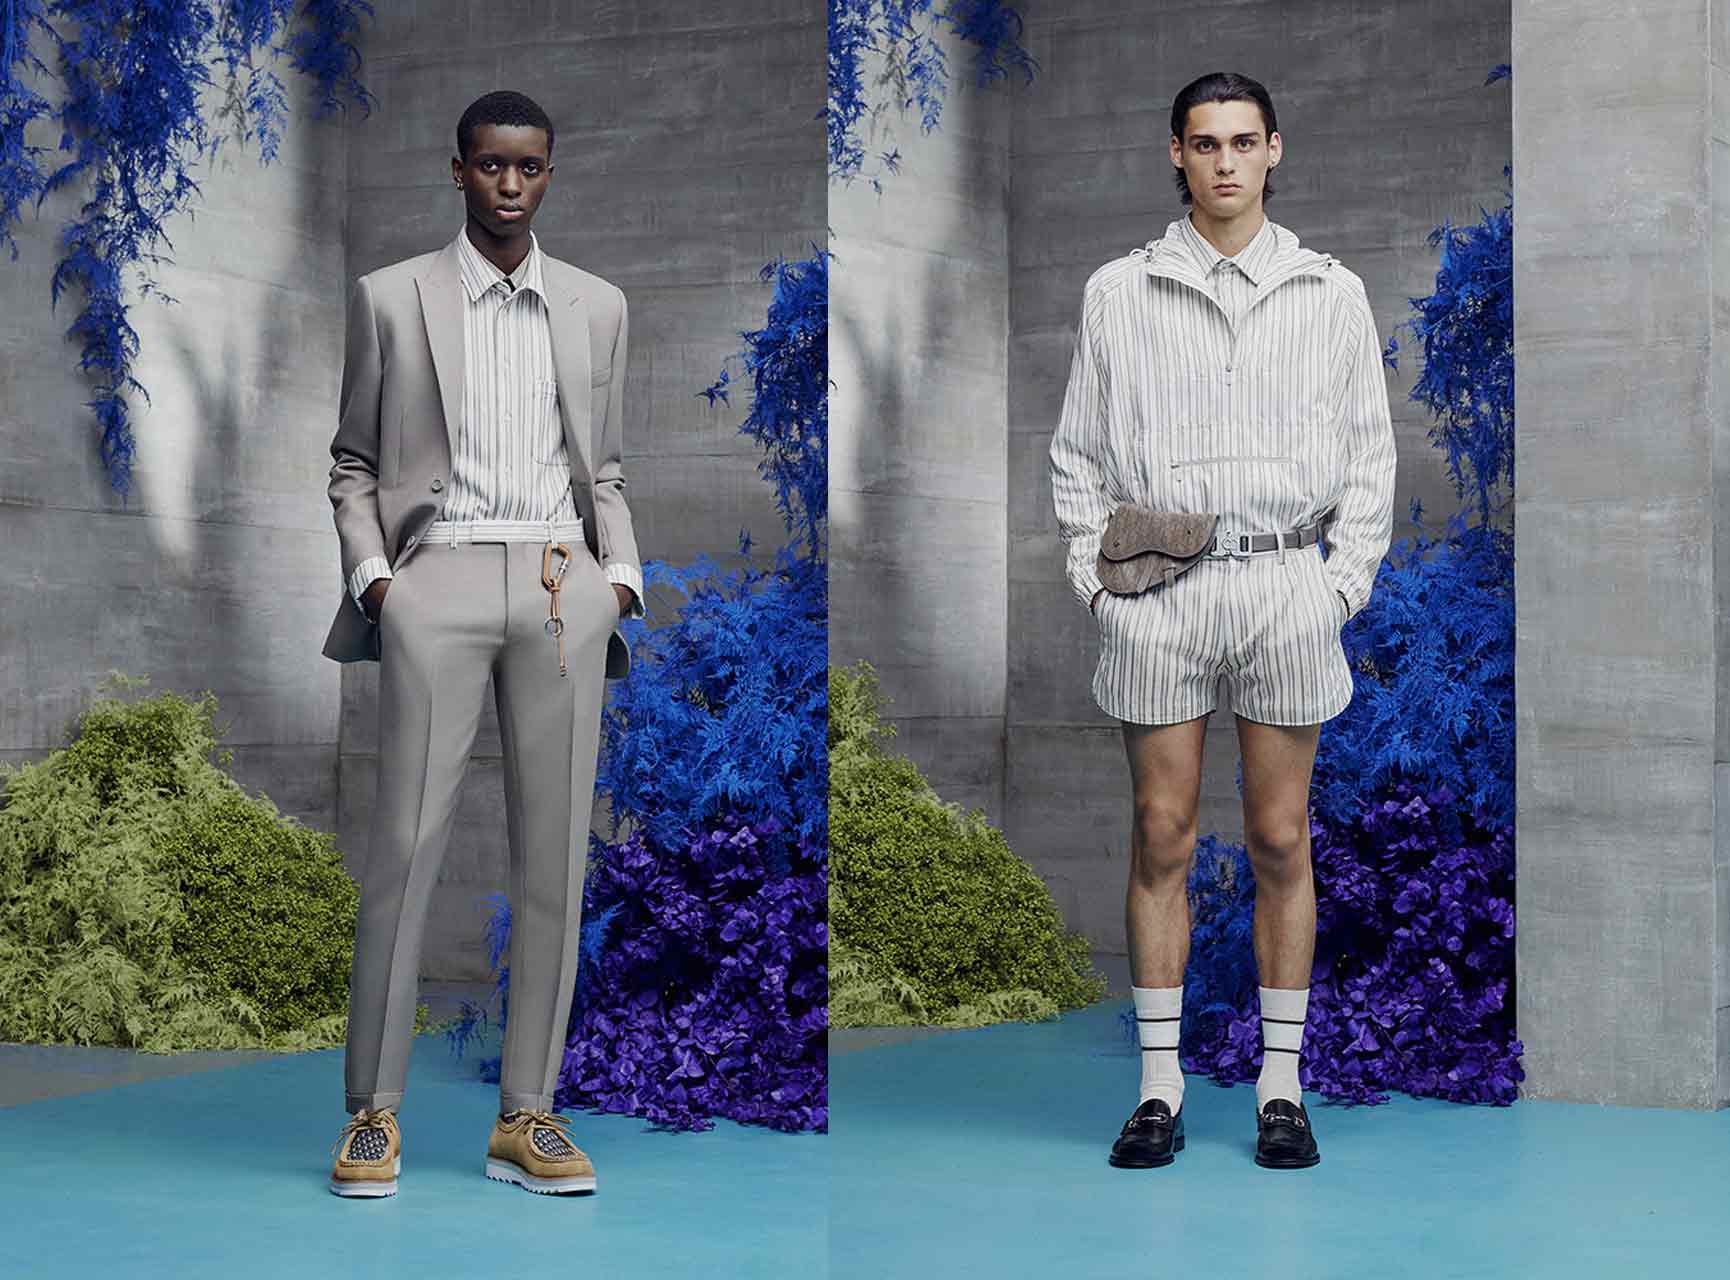 Dior's Resort 2021 menswear collection is based on flowers